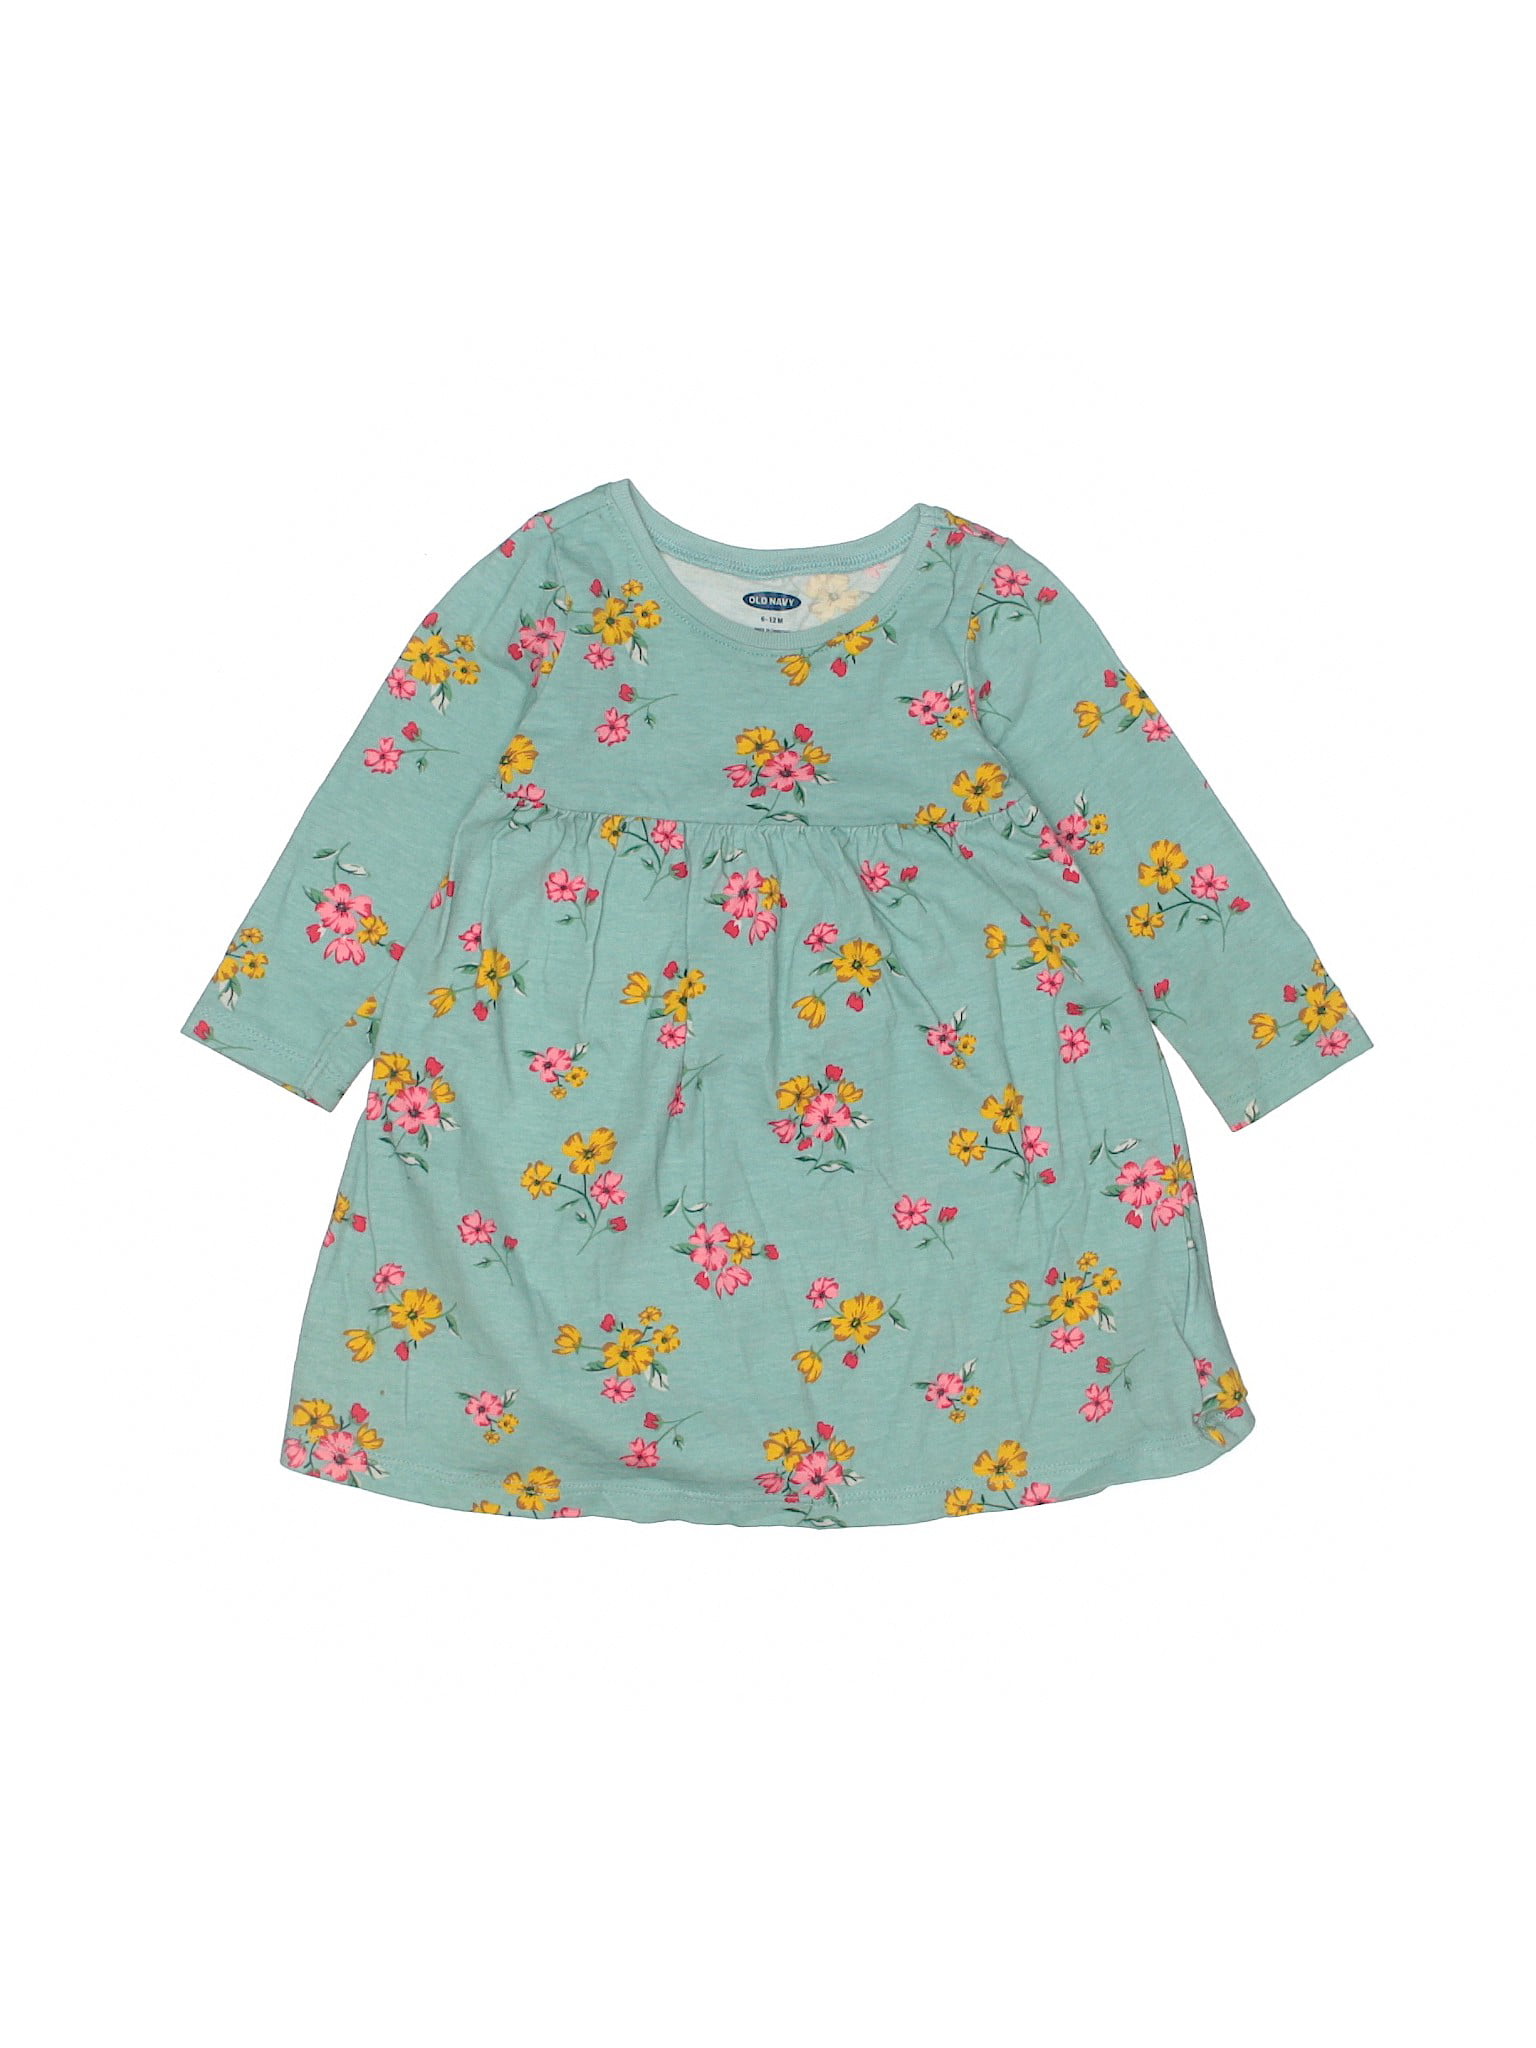 Old Navy - Pre-Owned Old Navy Girl's Size 6-12 Mo Dress - Walmart.com ...